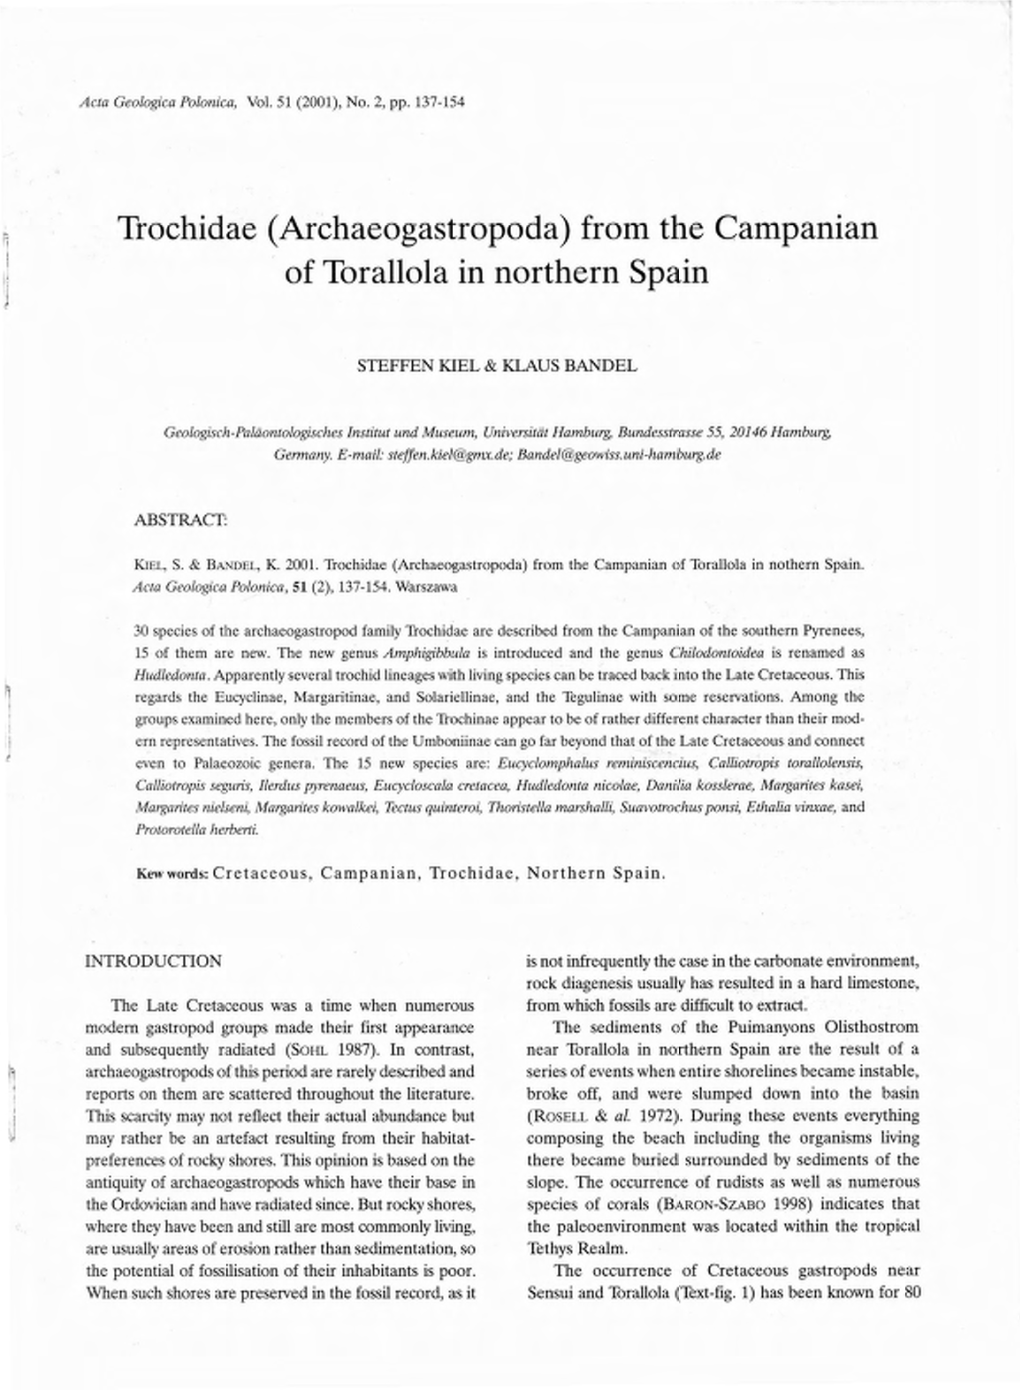 Trochidae (Archaeogastropoda) from the Campanian of Torallola in Northern Spain